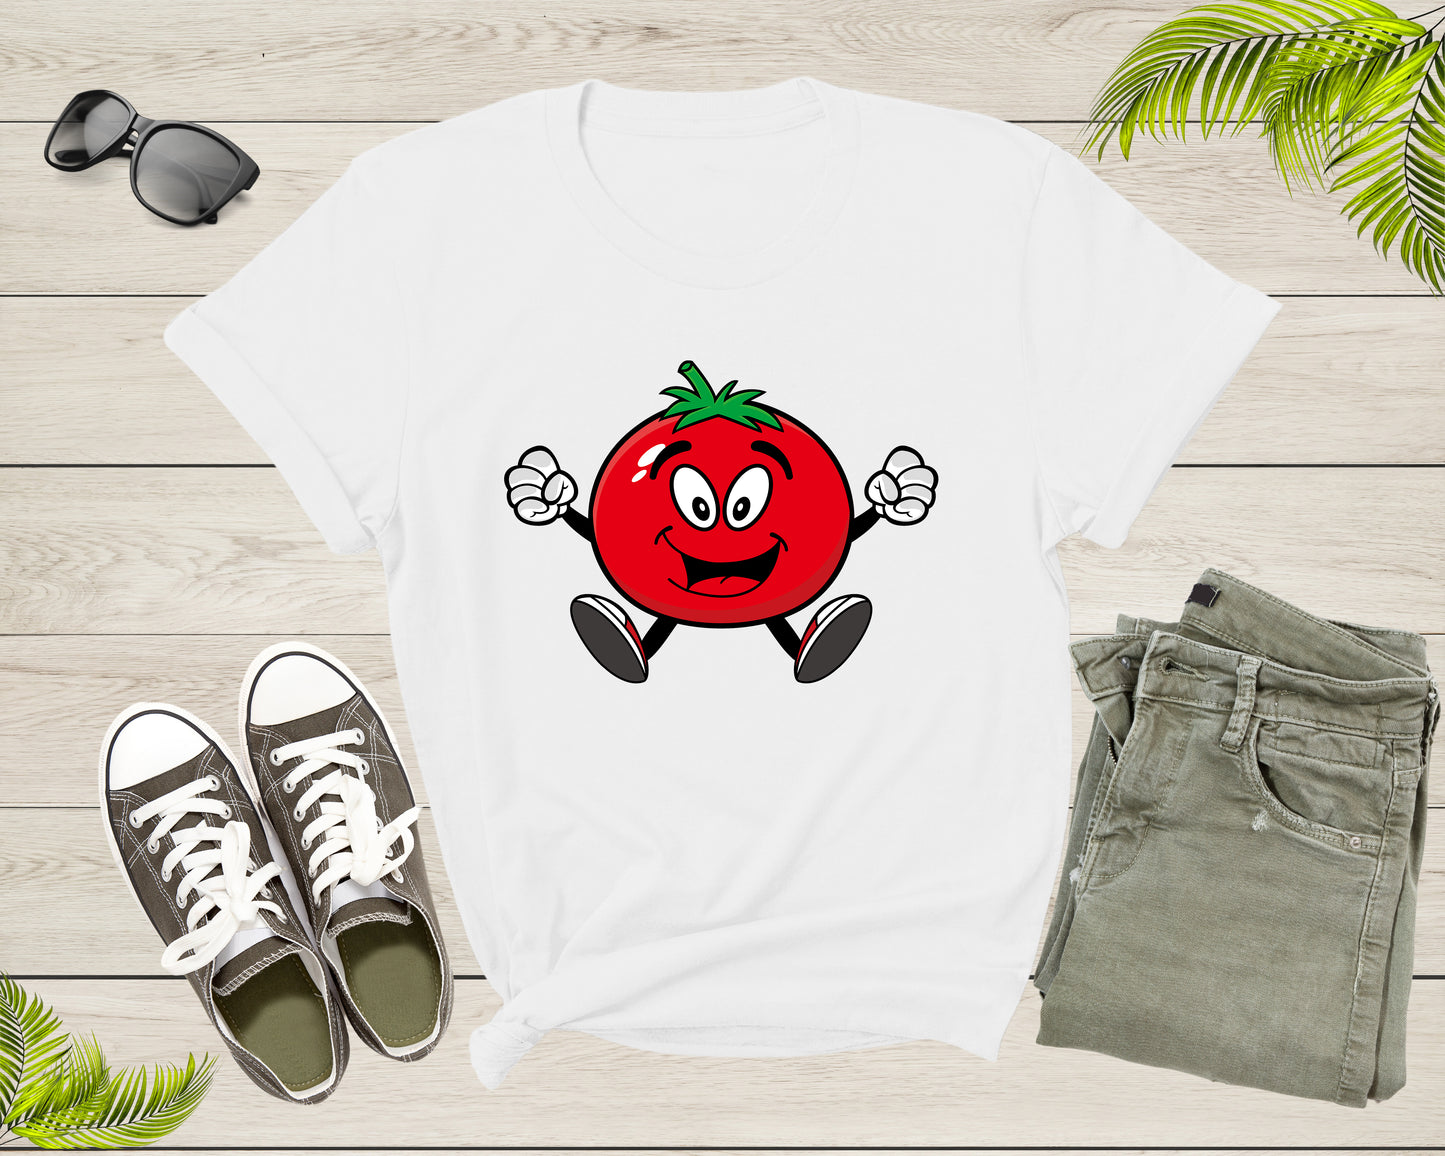 Cool Funny Happy Ripe Red Tomato Fruit for Men Women Kids T-Shirt Tomato T Shirt Gift for Men Women Kids Boys Girls Tomato Fruit TShirt